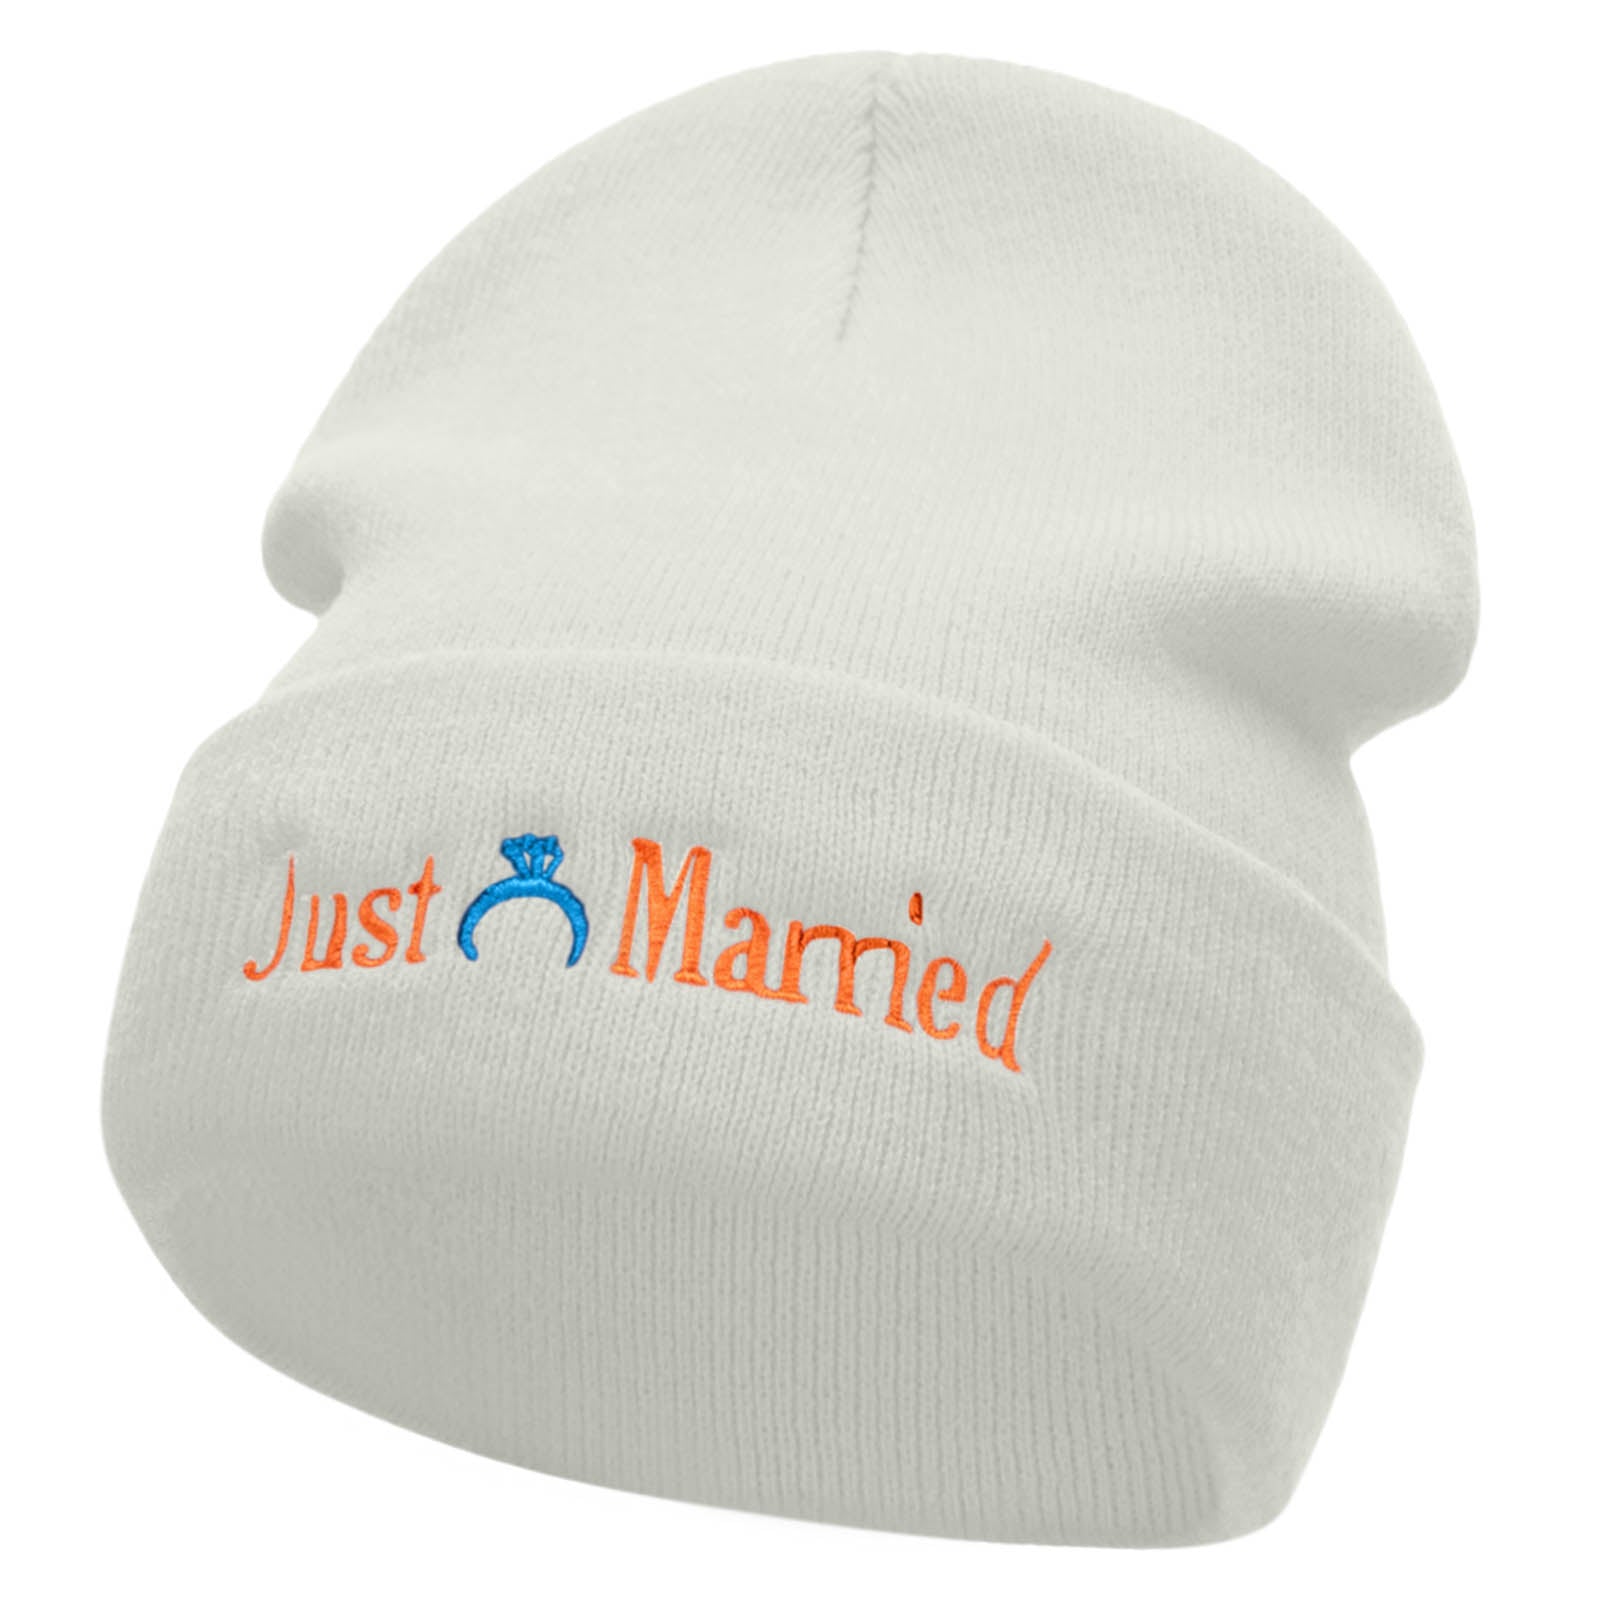 Just Married Ring Embroidered 12 Inch Long Knitted Beanie - White OSFM